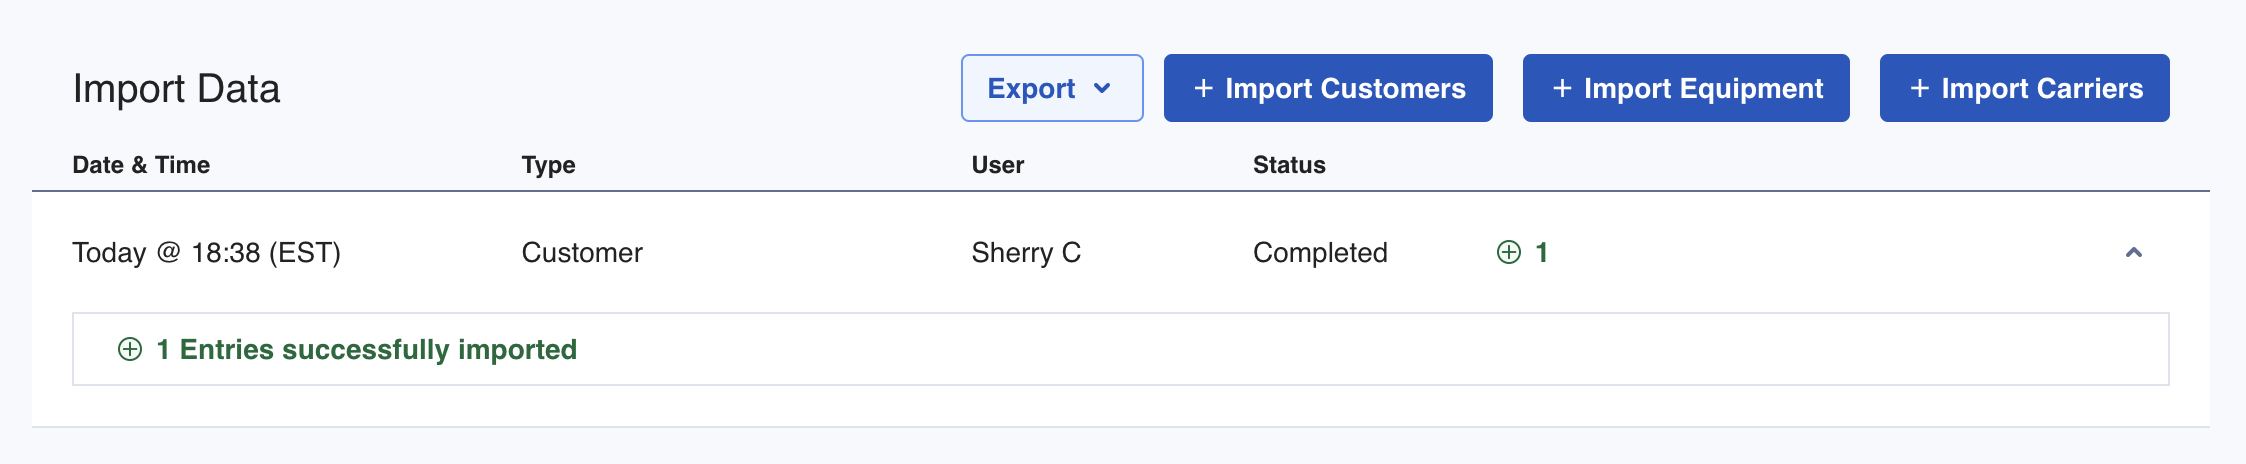 Once the customers have been imported, the status will become Completed along with the uploaded date & time. You can expand it to see how many entries were successfully imported.